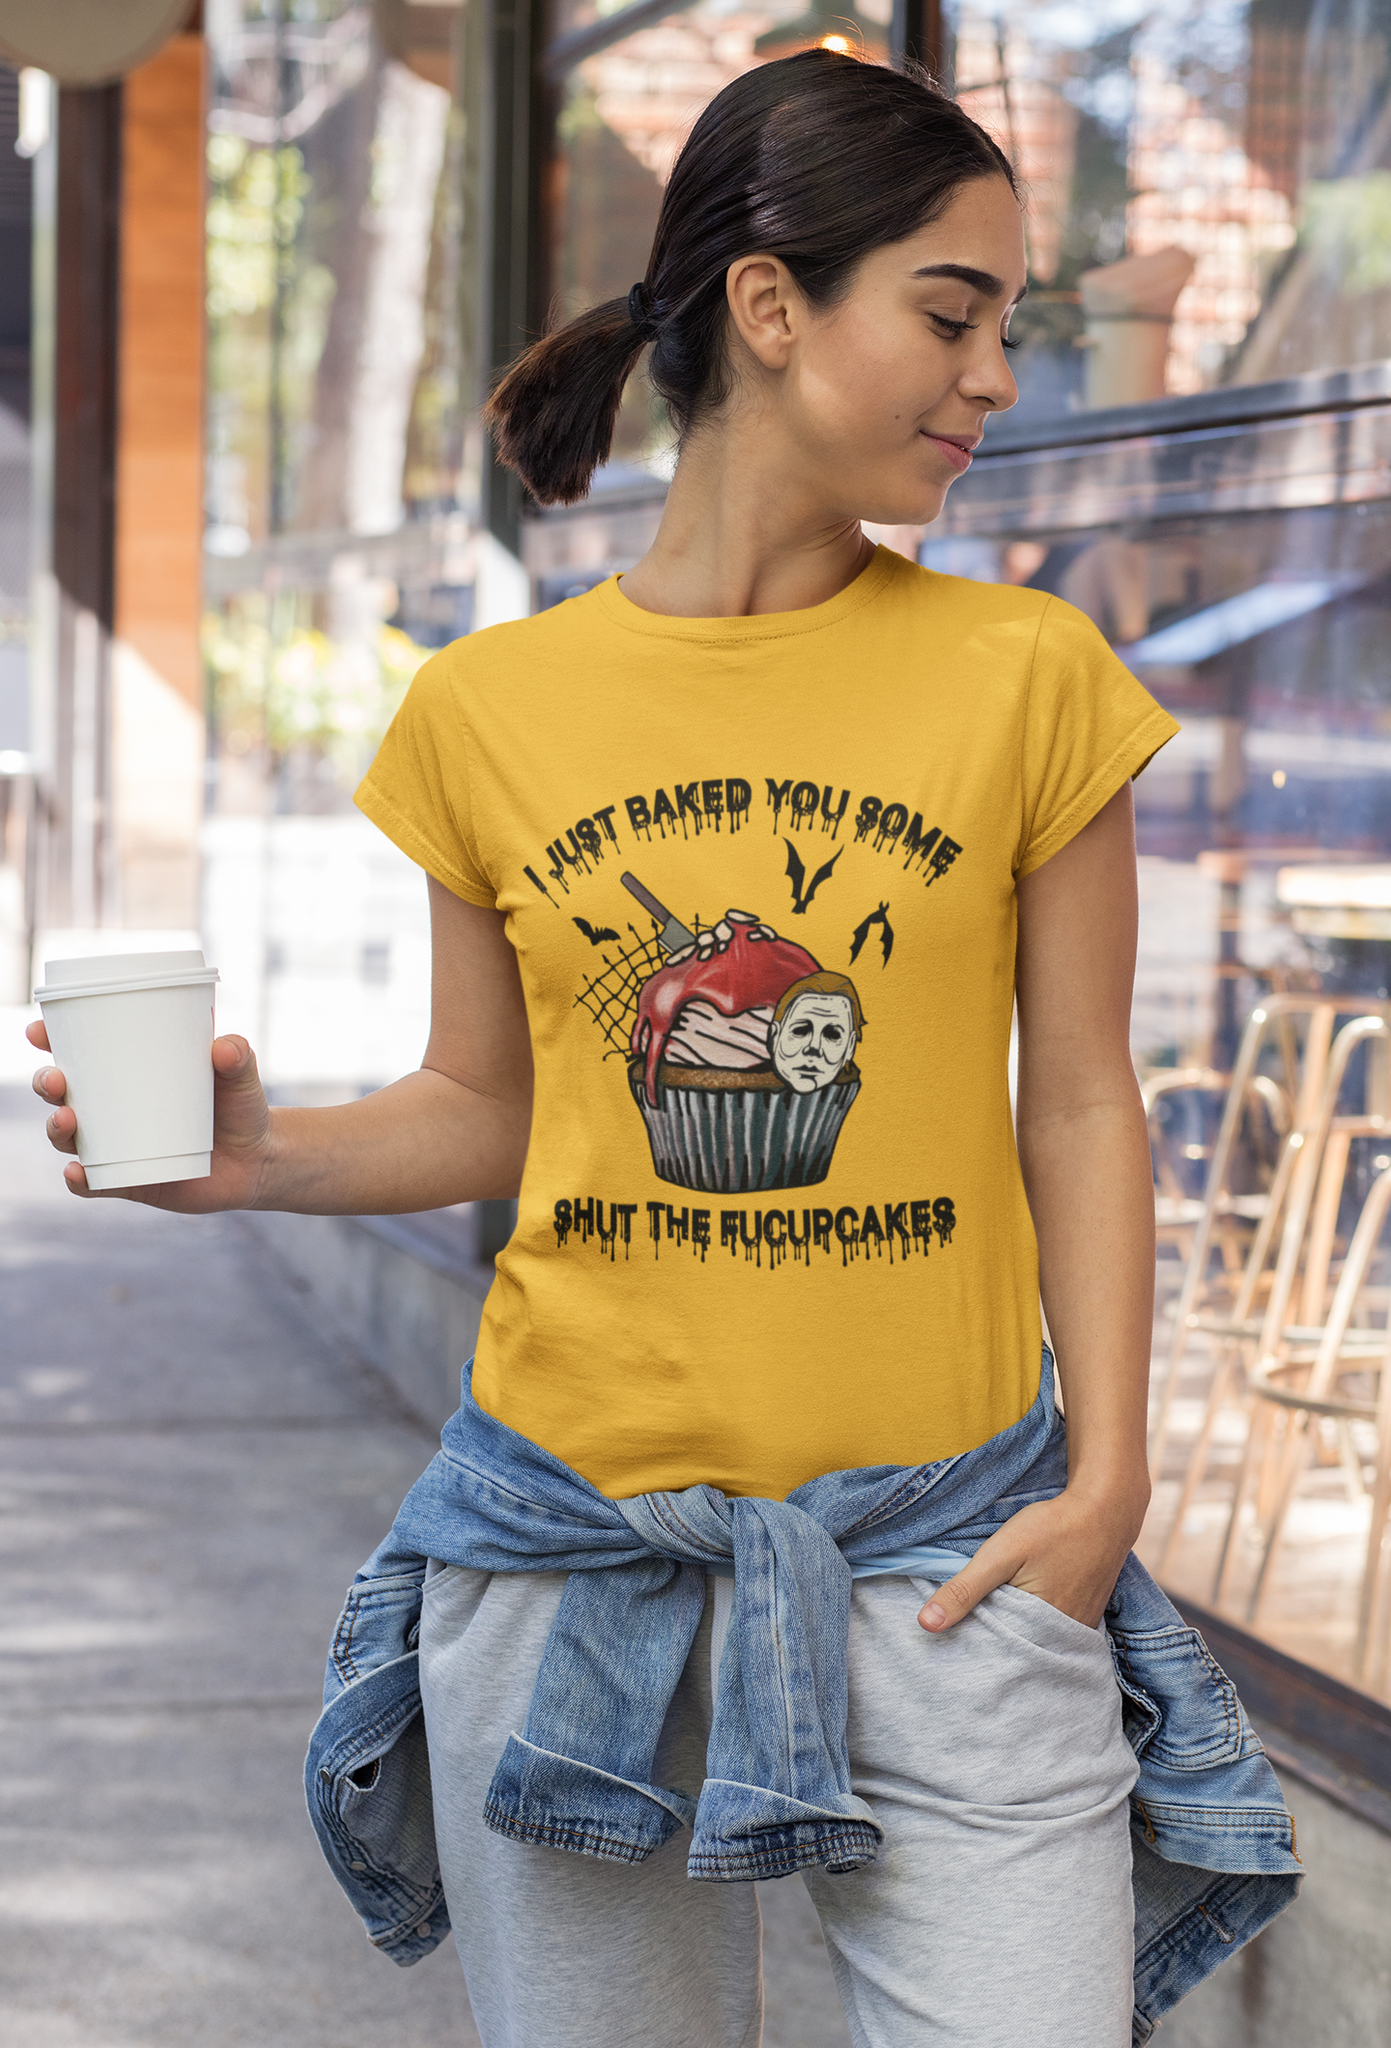 Halloween T Shirt, I Just Baked You Some Shut The Fucupcakes Tshirt, Michael Myers Cupcake T Shirt, Halloween Gifts